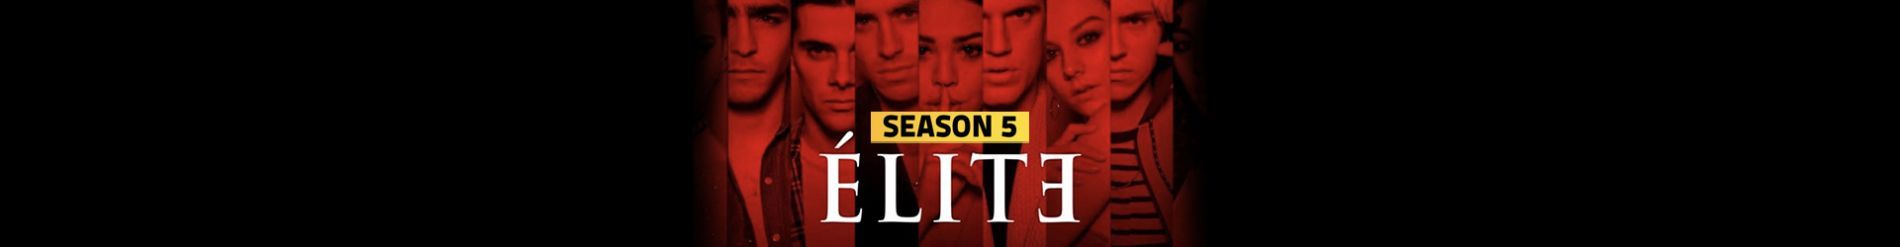 Merk & Kremont, Buzz Low 'Do It' used as campaign song for Netflix' Elite Season 5